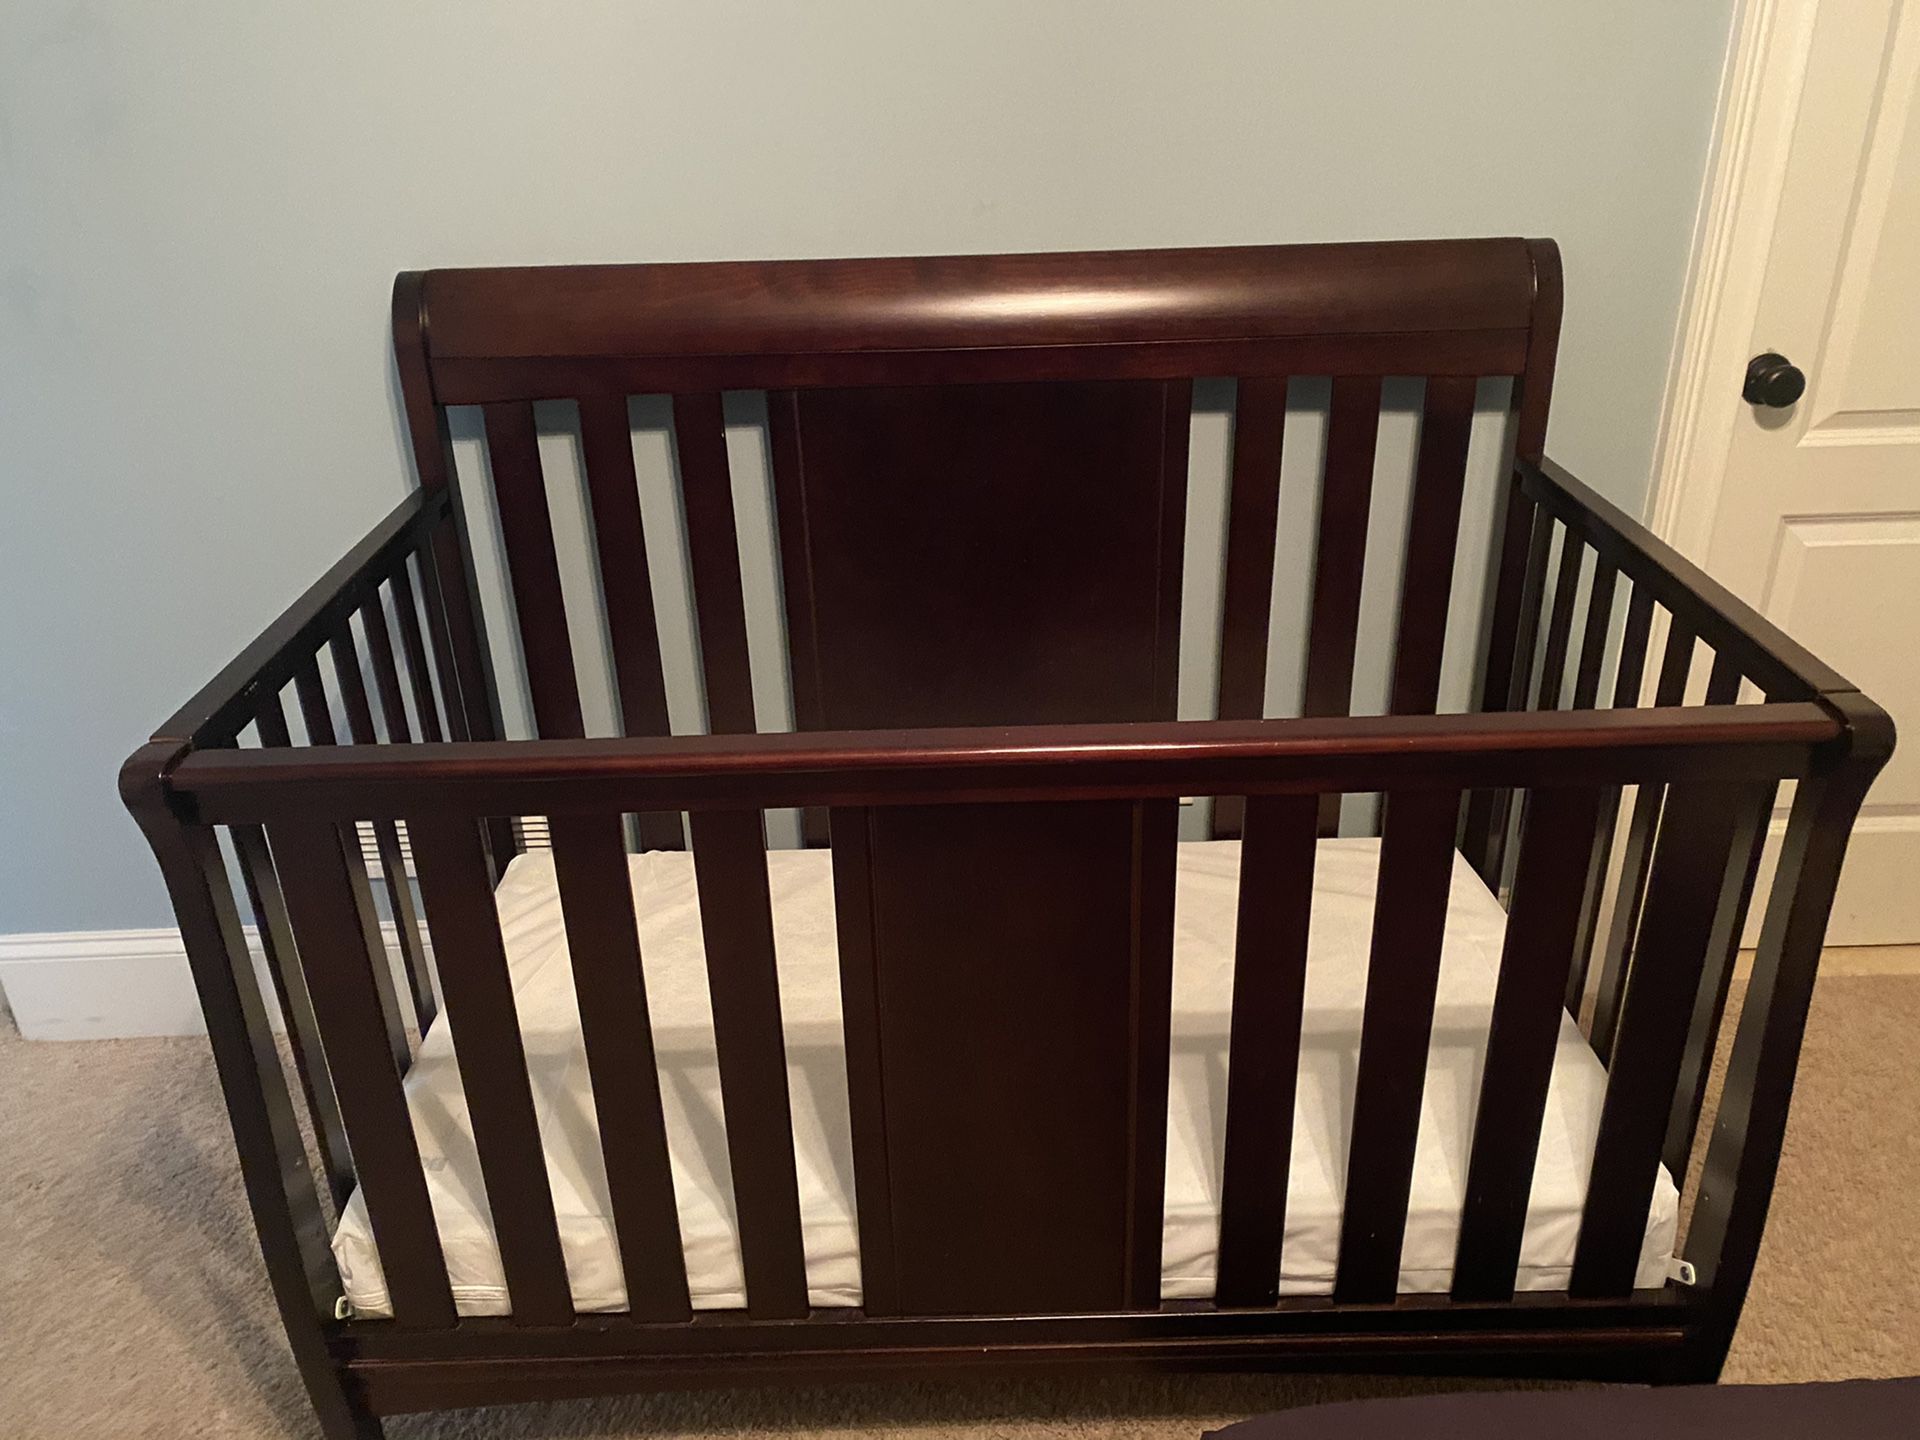 Delta Children’s Products Crib & Changing Table